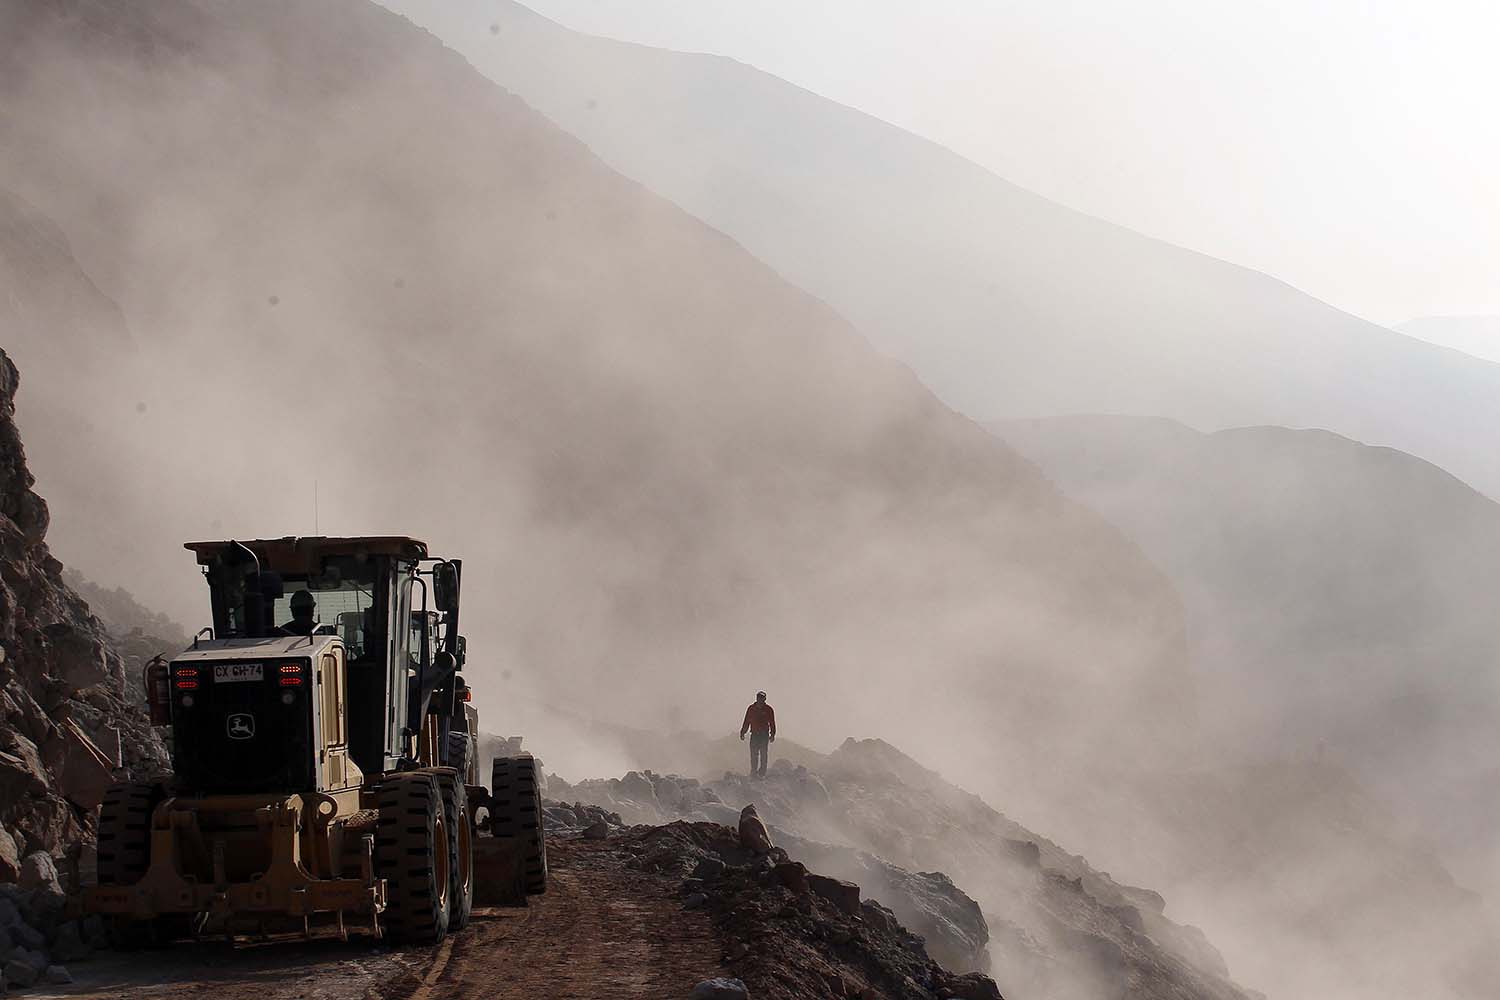 Apr. 3, 2014. Heavy machinery is used in the clearing of debris on the road leading to the town of Camarones, in Arica. The road was cut off due to the magnitude-8.2 quake that struck Chile's Northern coast on Tuesday.